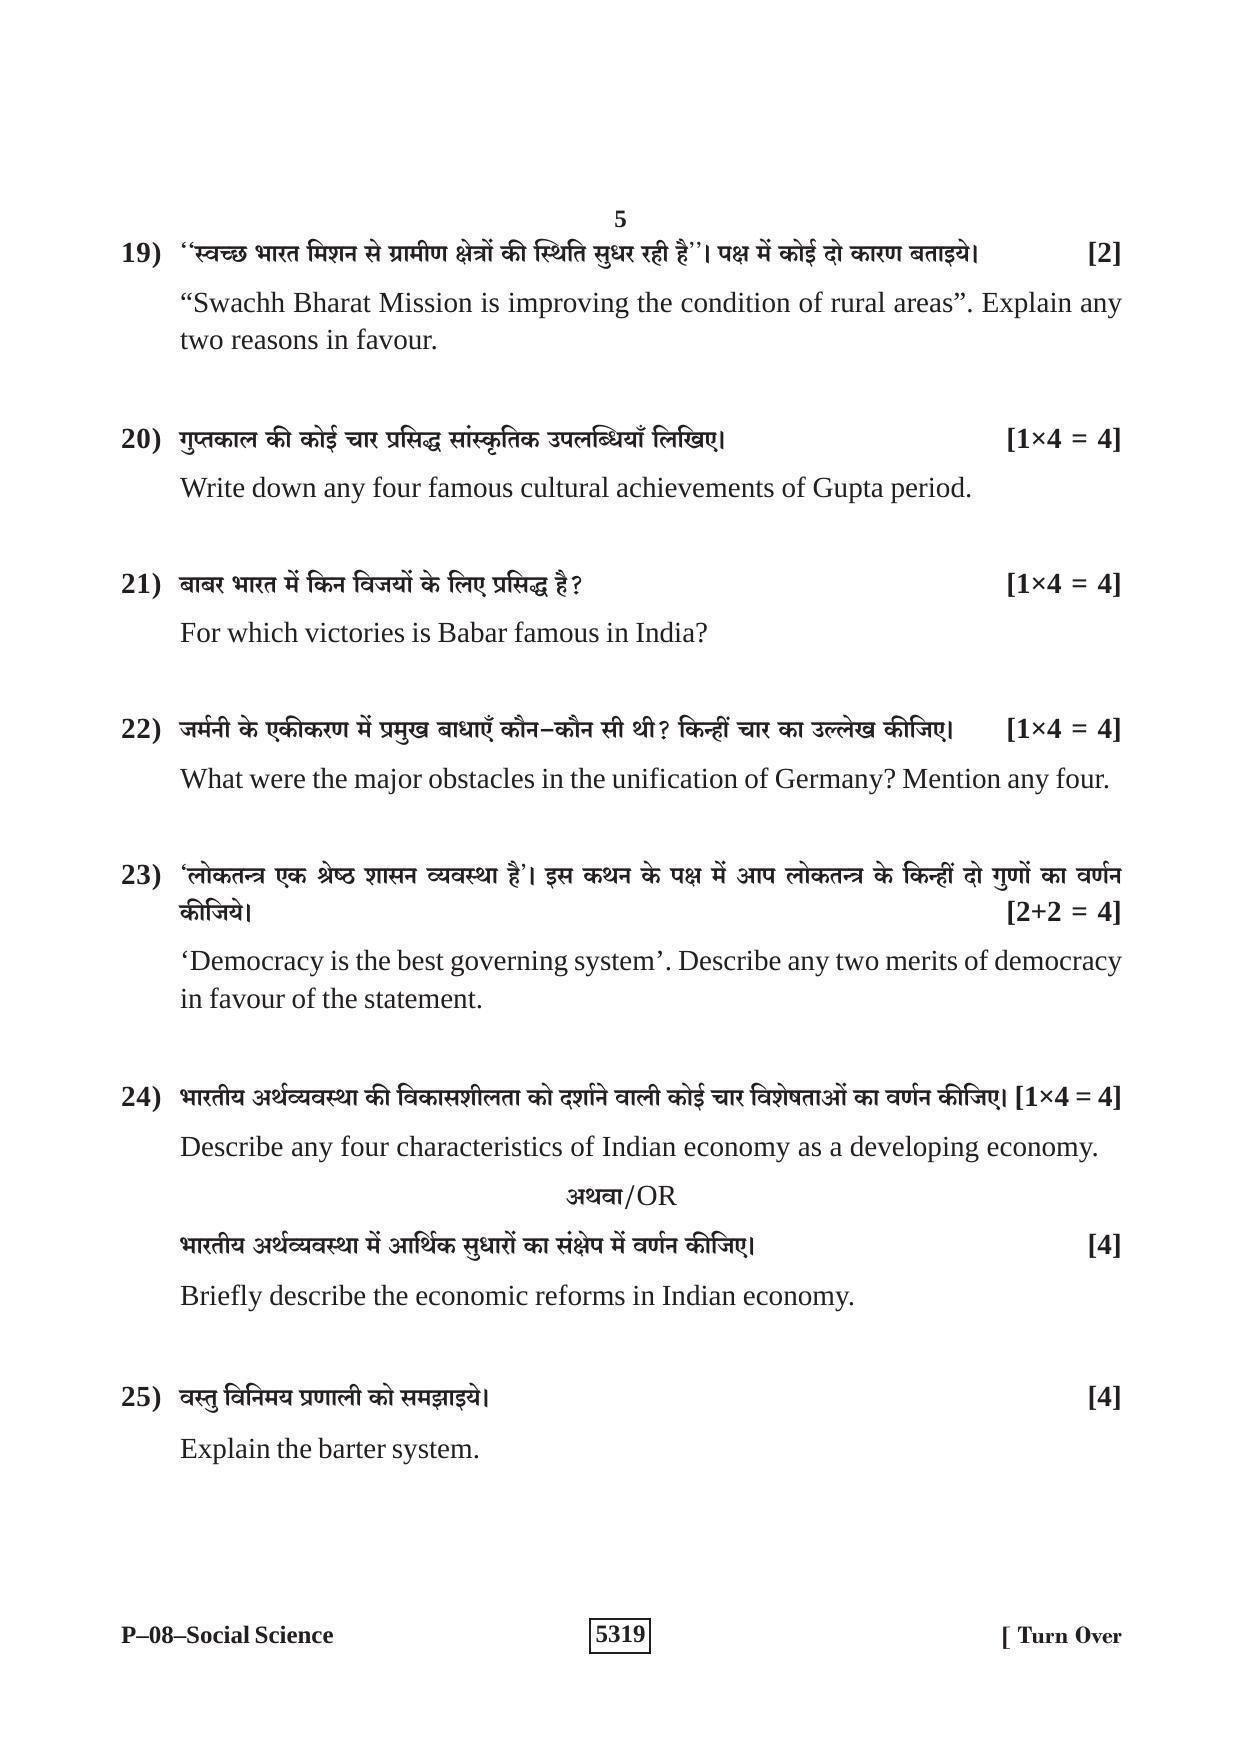 RBSE 2020 Social Science Praveshika Question Paper - Page 5